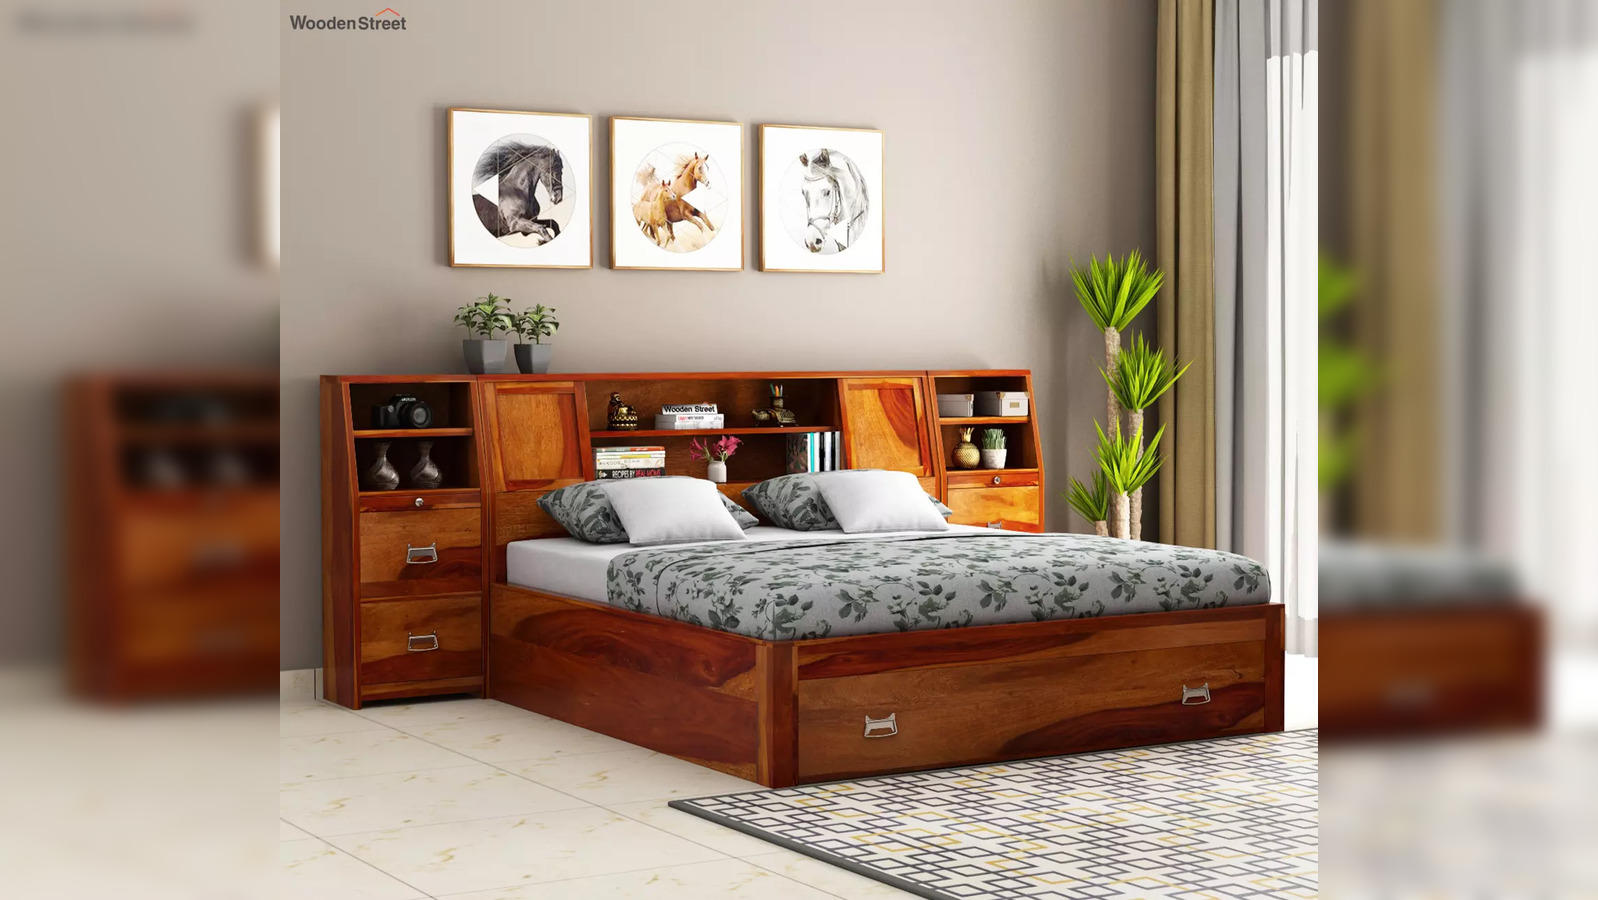 King-Size Bed: Best King-Size beds - Get a Good Night's Sleep and Enjoy  Luxury Comfort - The Economic Times